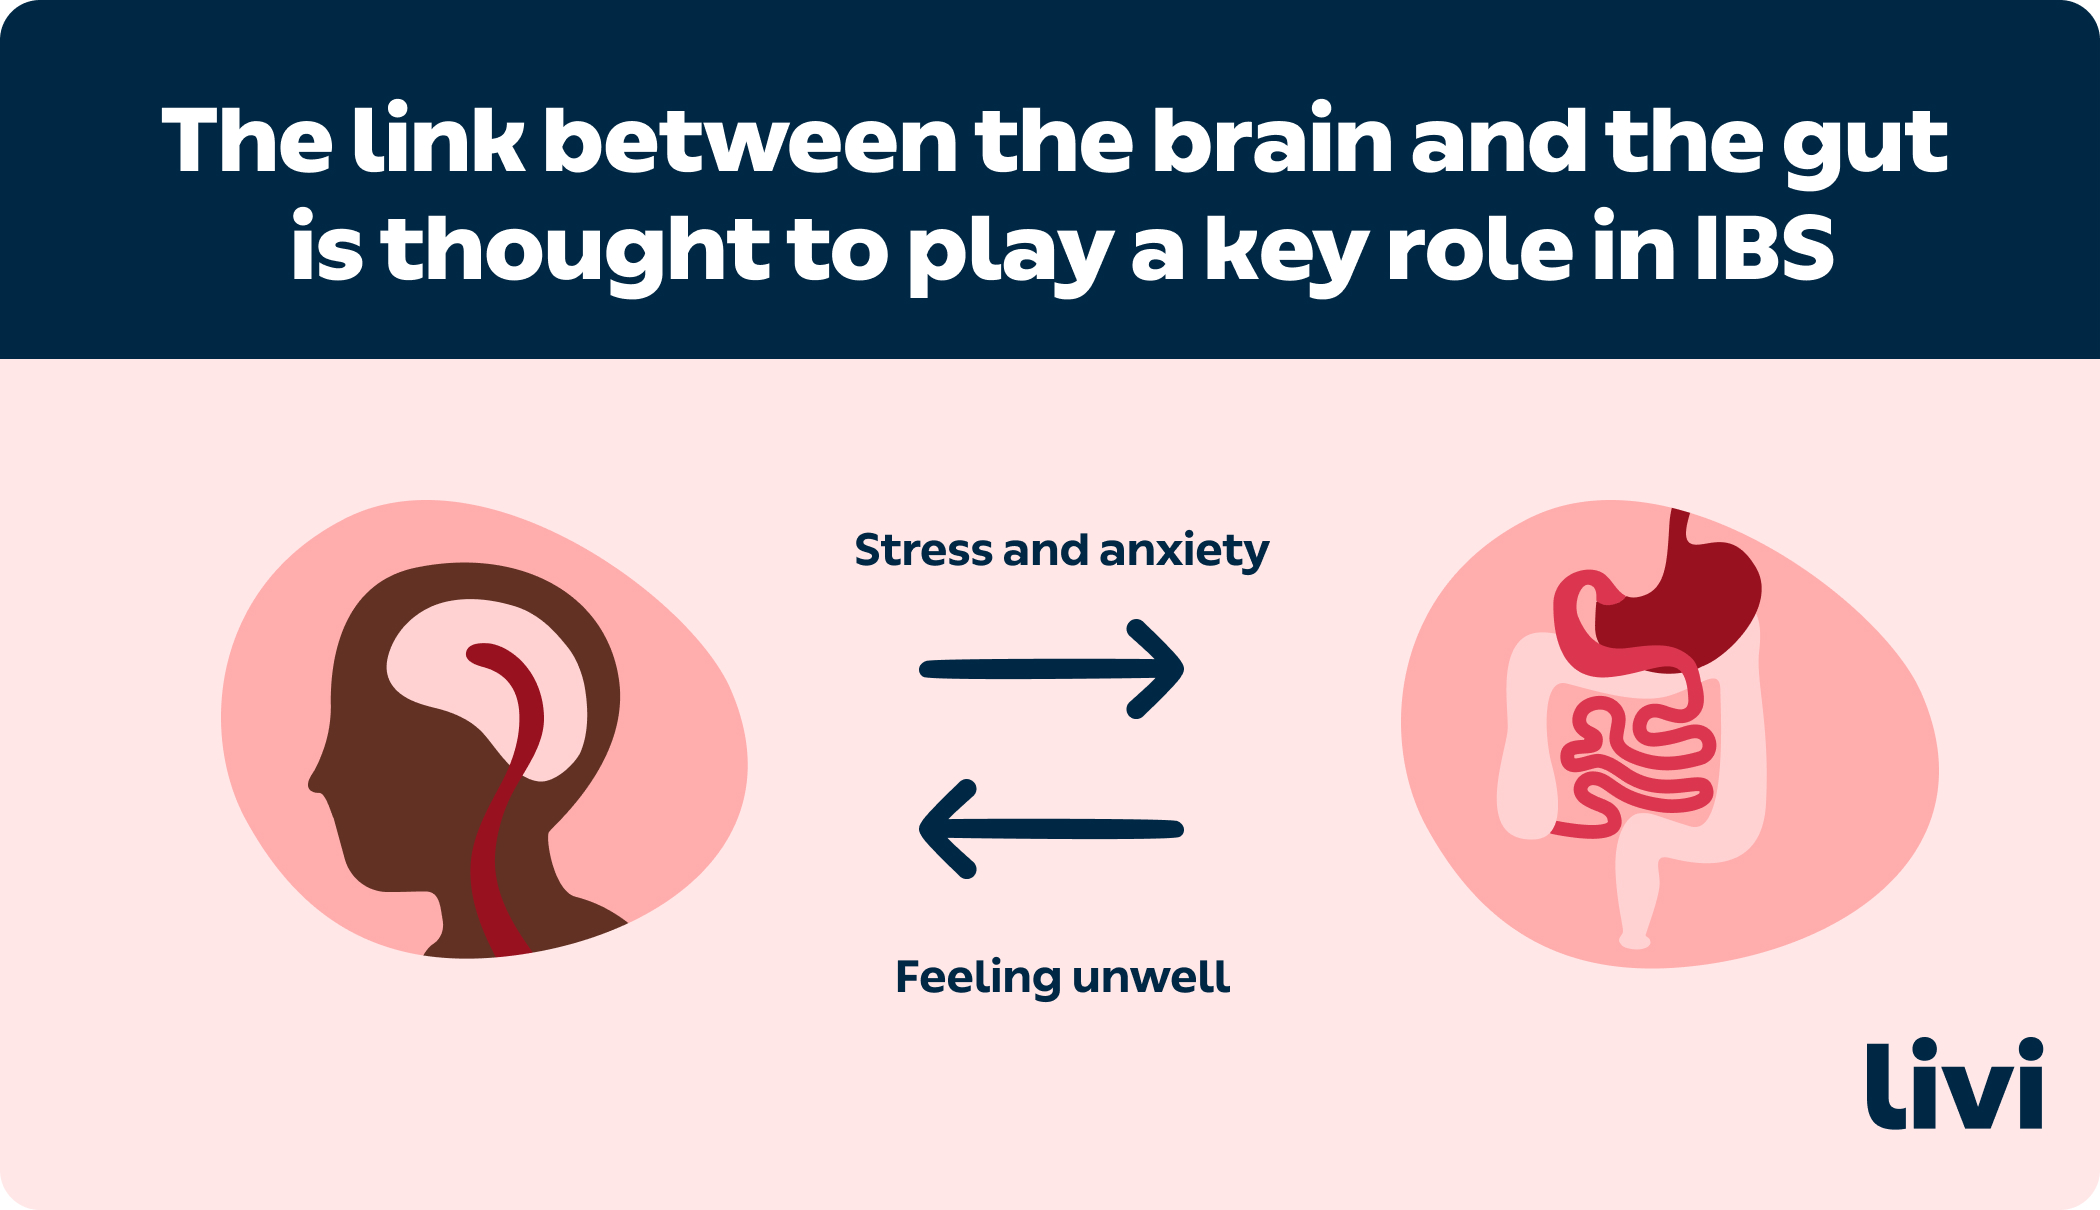 The link between the brain and the gut is thought to play a key role in IBS